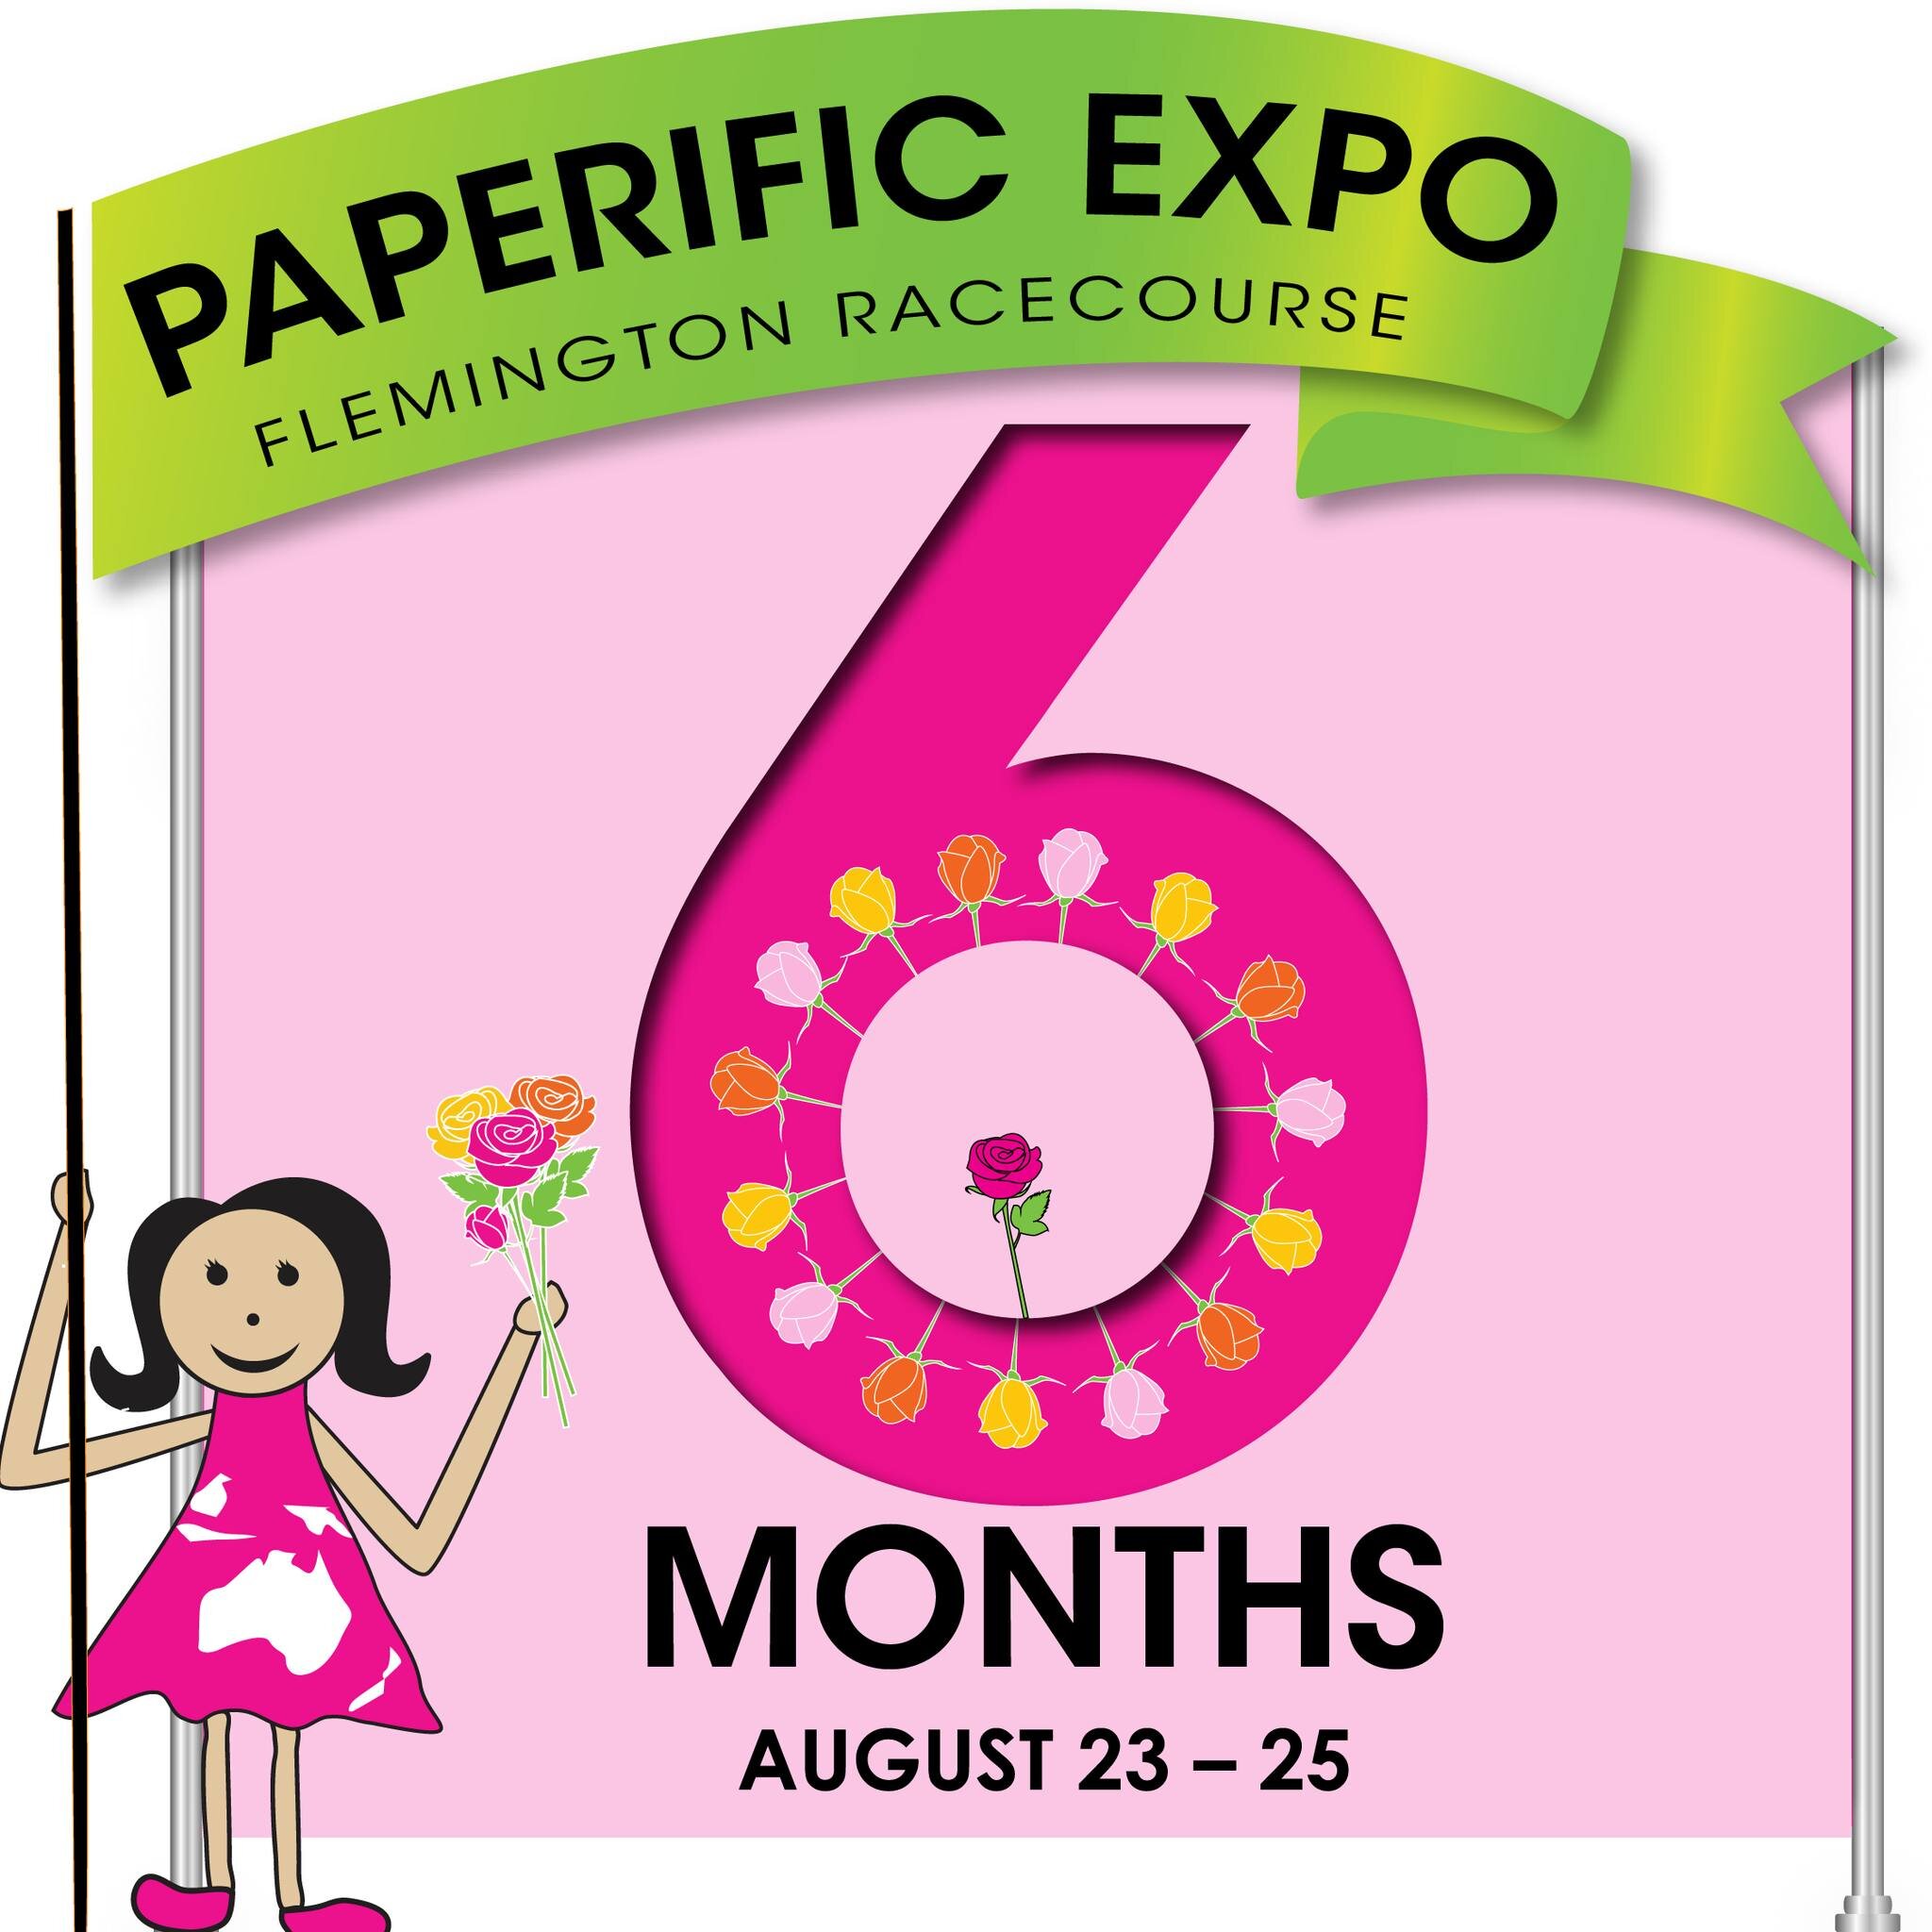 WOW! This year is flying by fast. It's six months until Paperific 2024 and we are looking forward to catching up with our favourite papercraft businesses at Flemington Racecourse on Friday August 23rd  to Sunday 25th. It will be heaven on earth for p